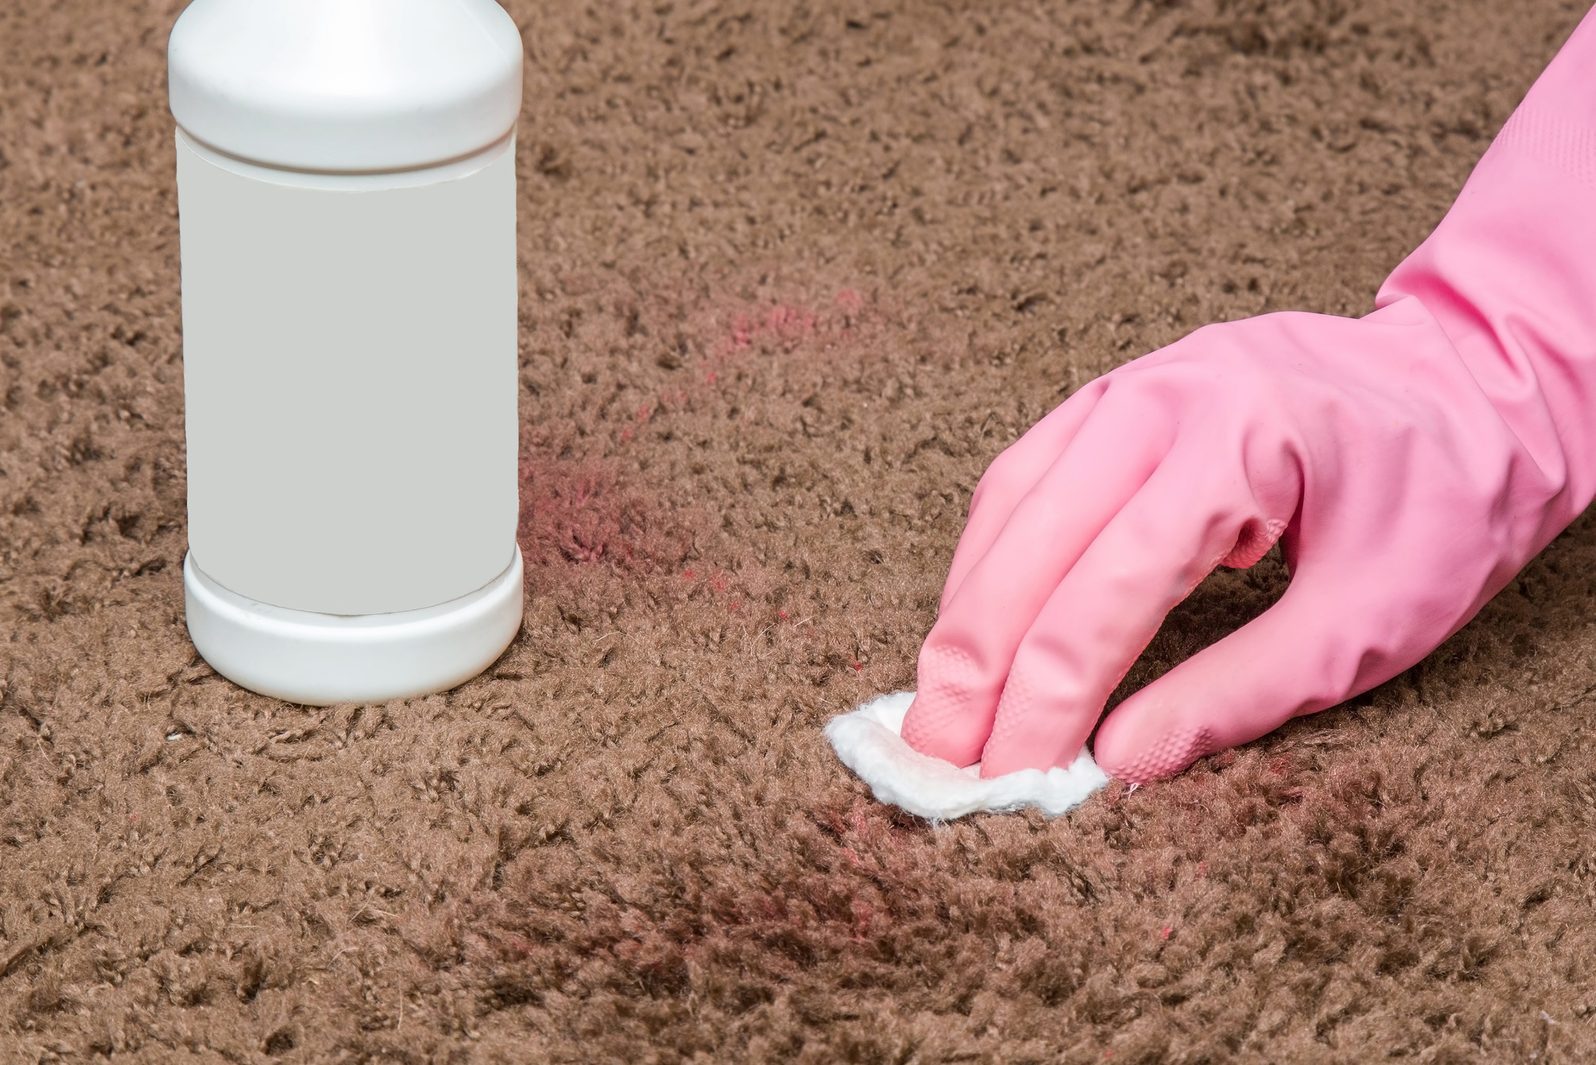 Nail polish stain cleaning with special chemical liquid. Carpet cleaning.